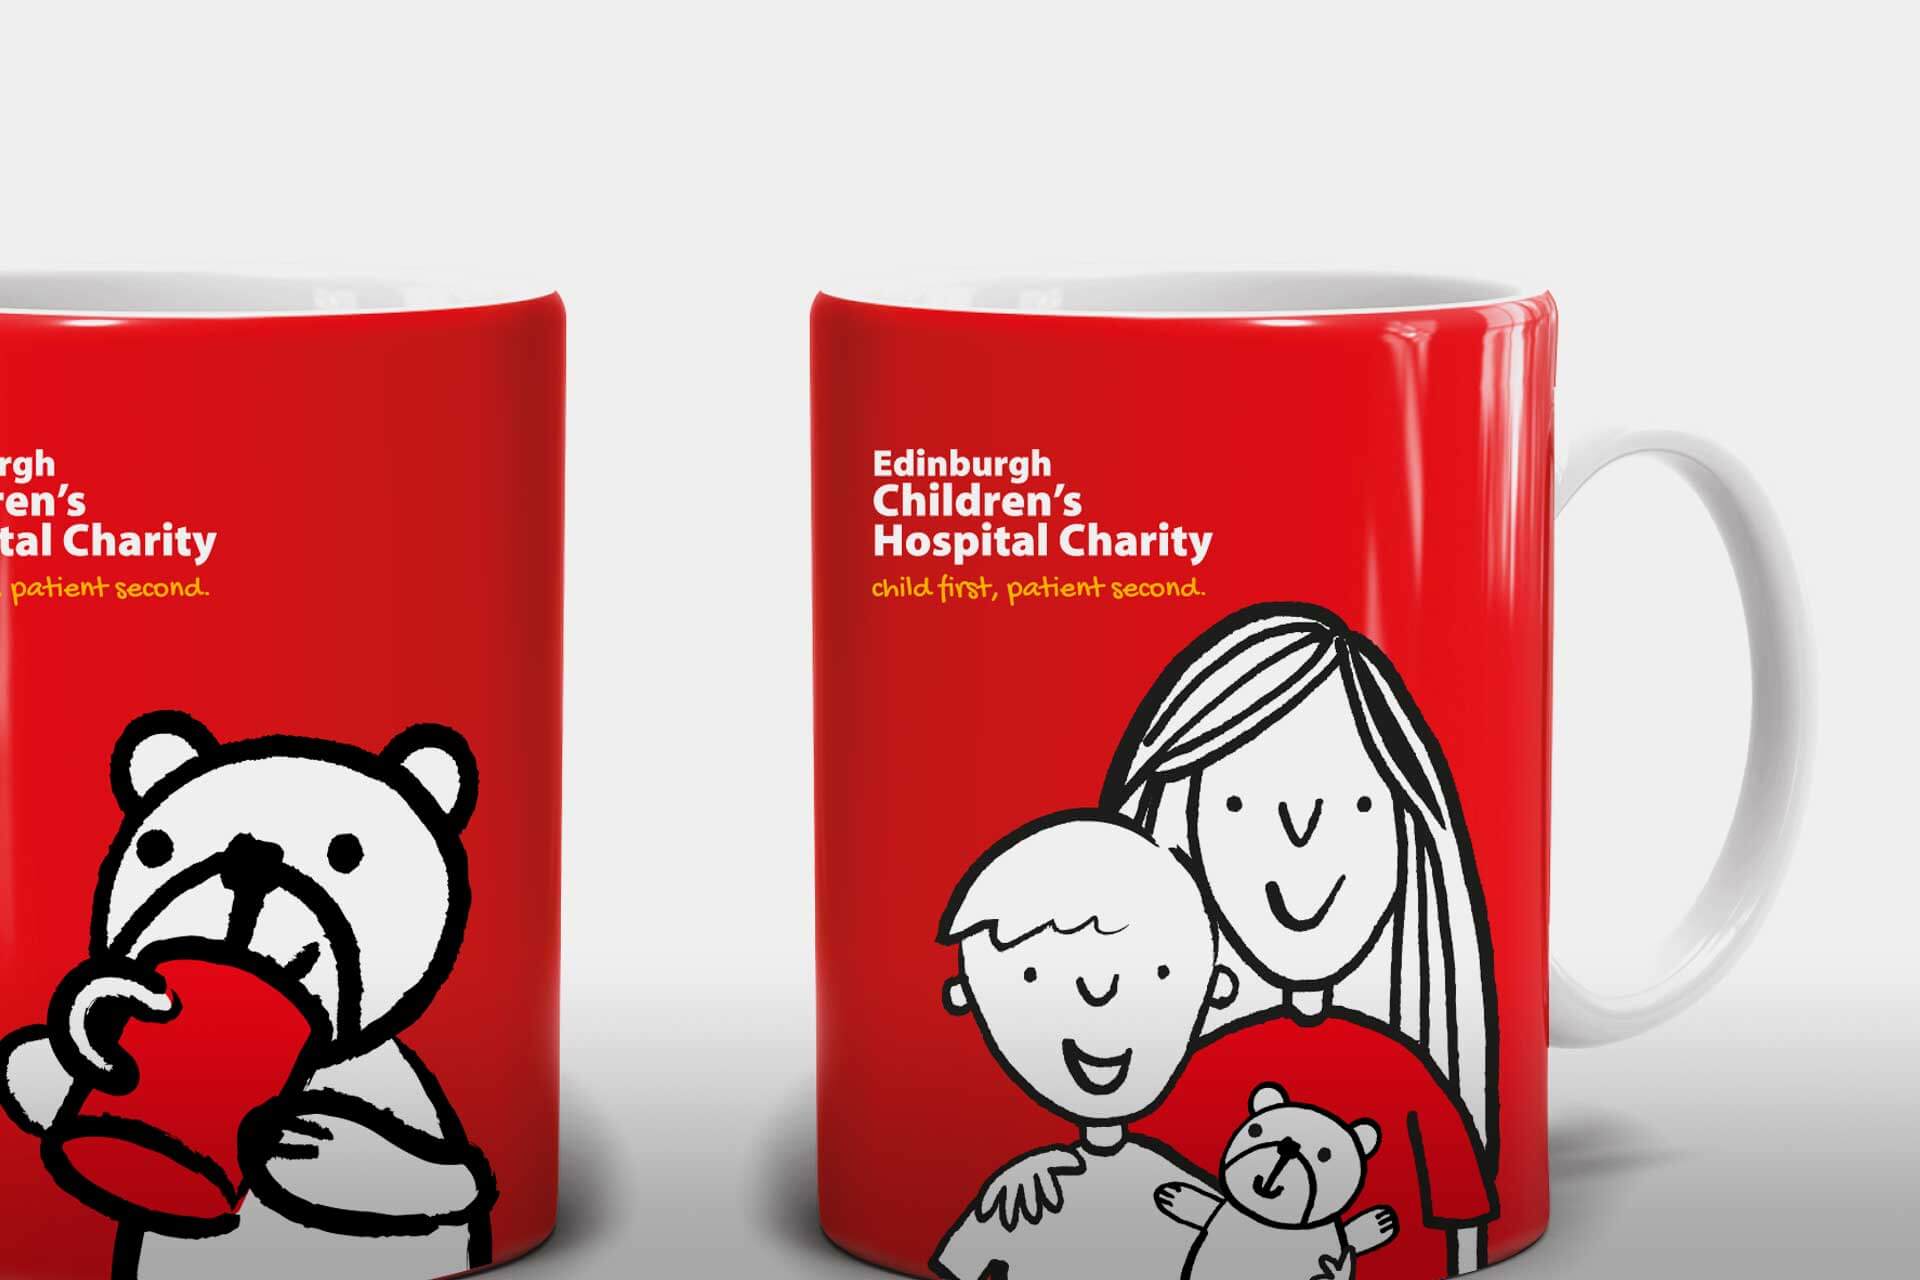 Branded mugs visual for third sector marketing project